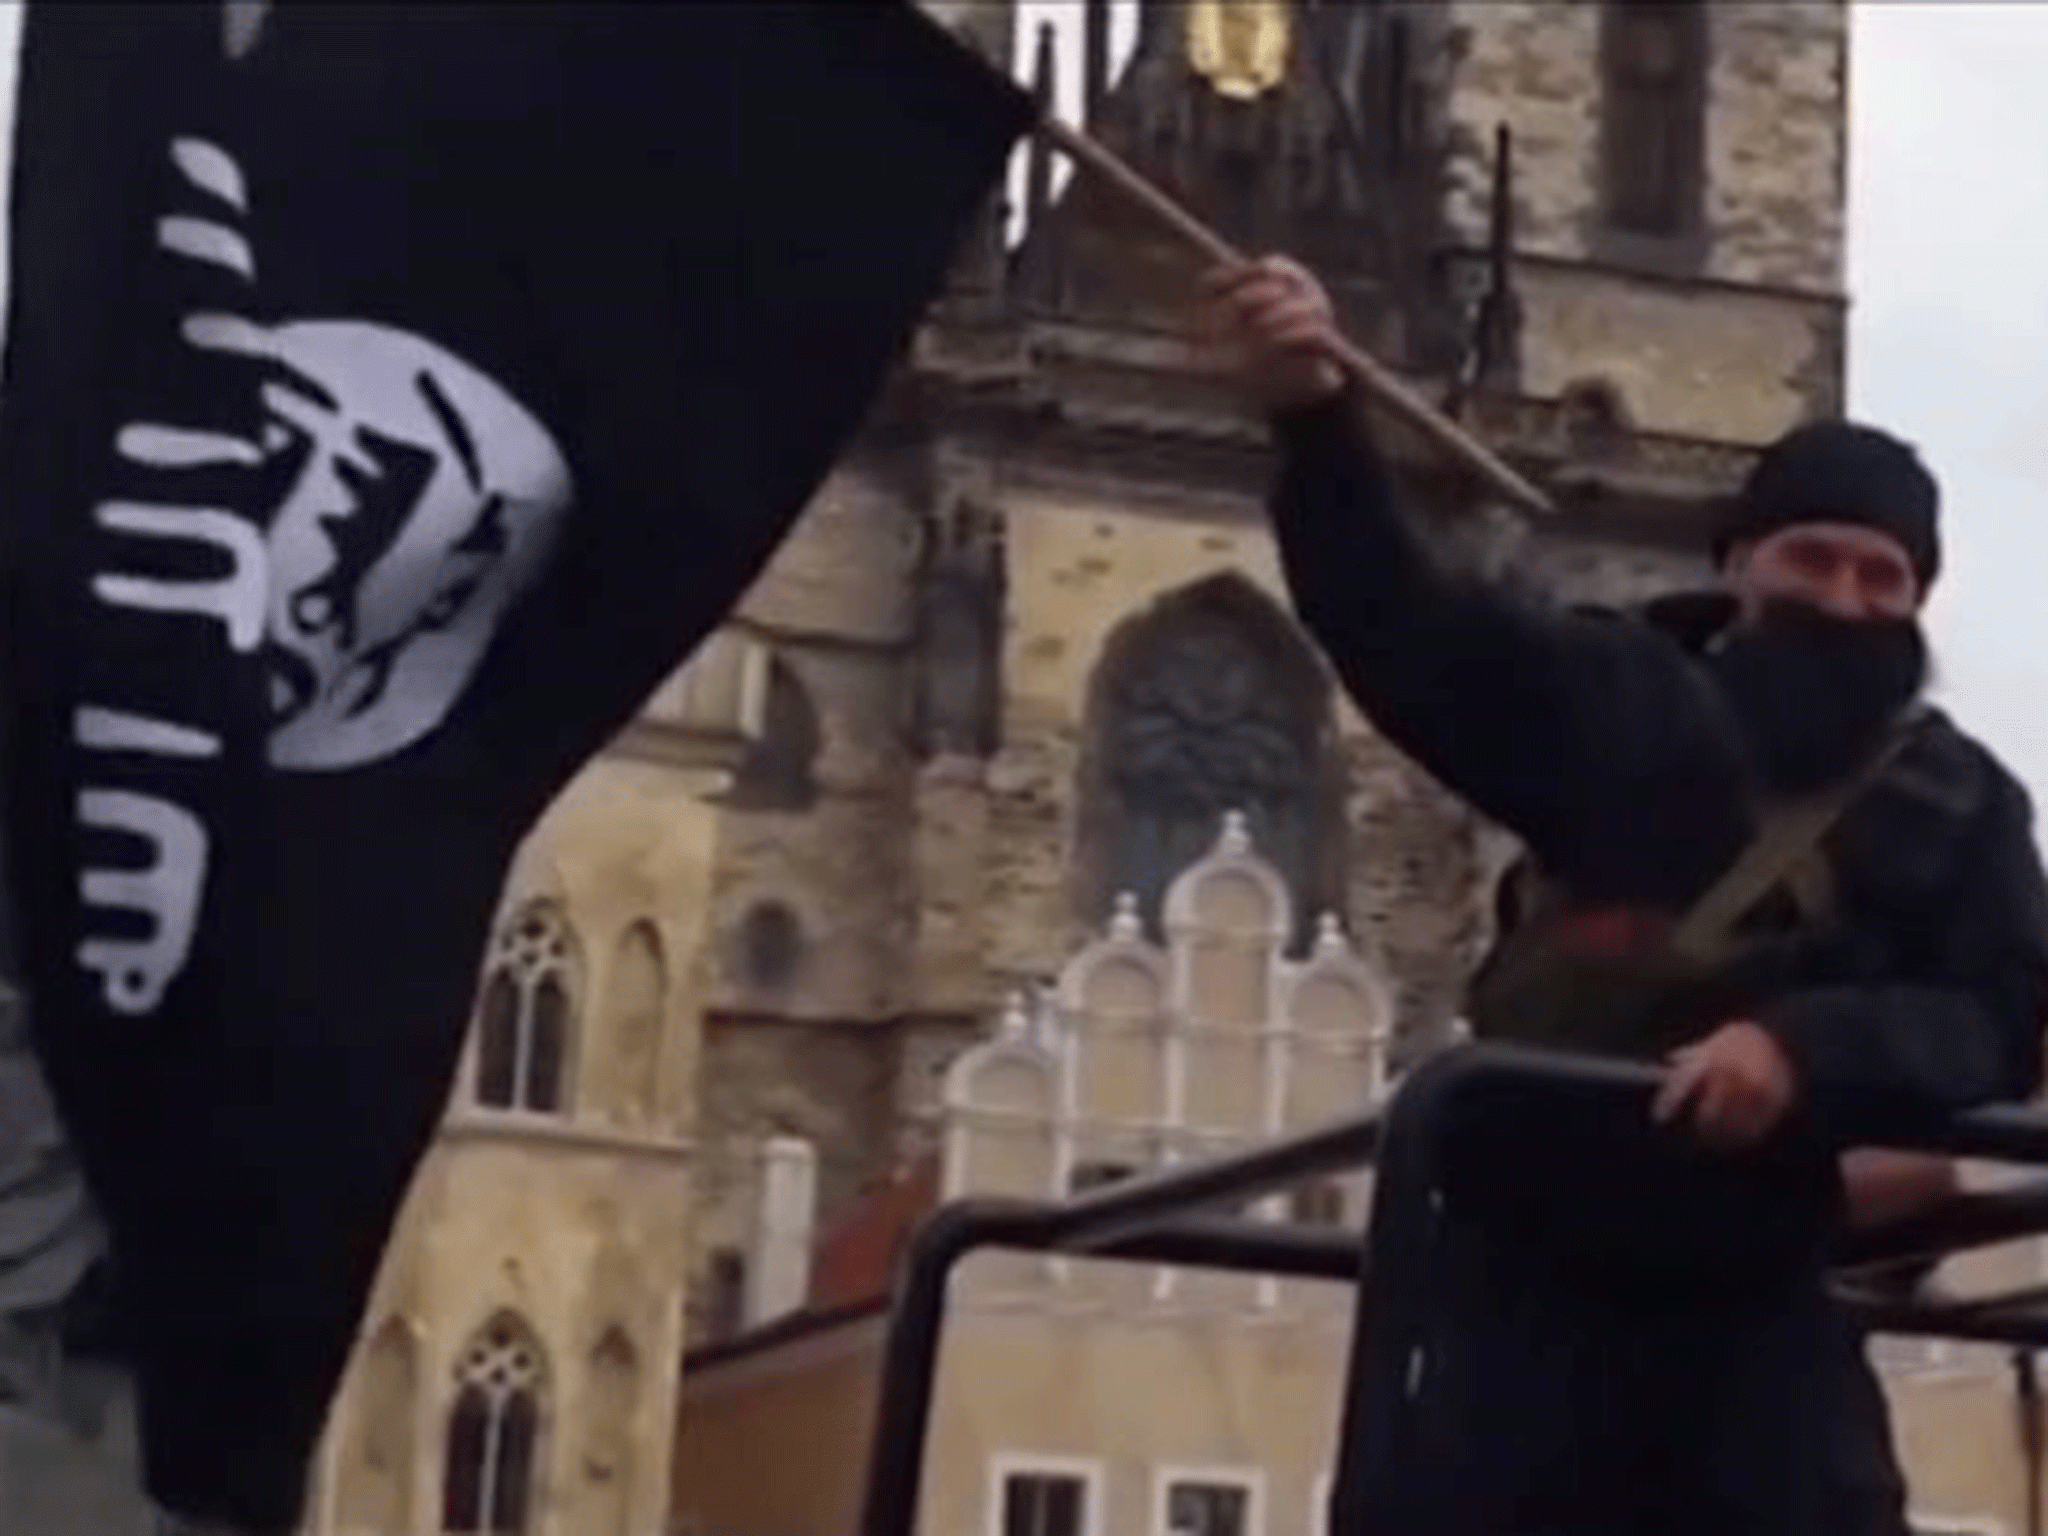 Men with detachable beards waved fake Isis flags in a demonstration approved by Prague's City Hall officials